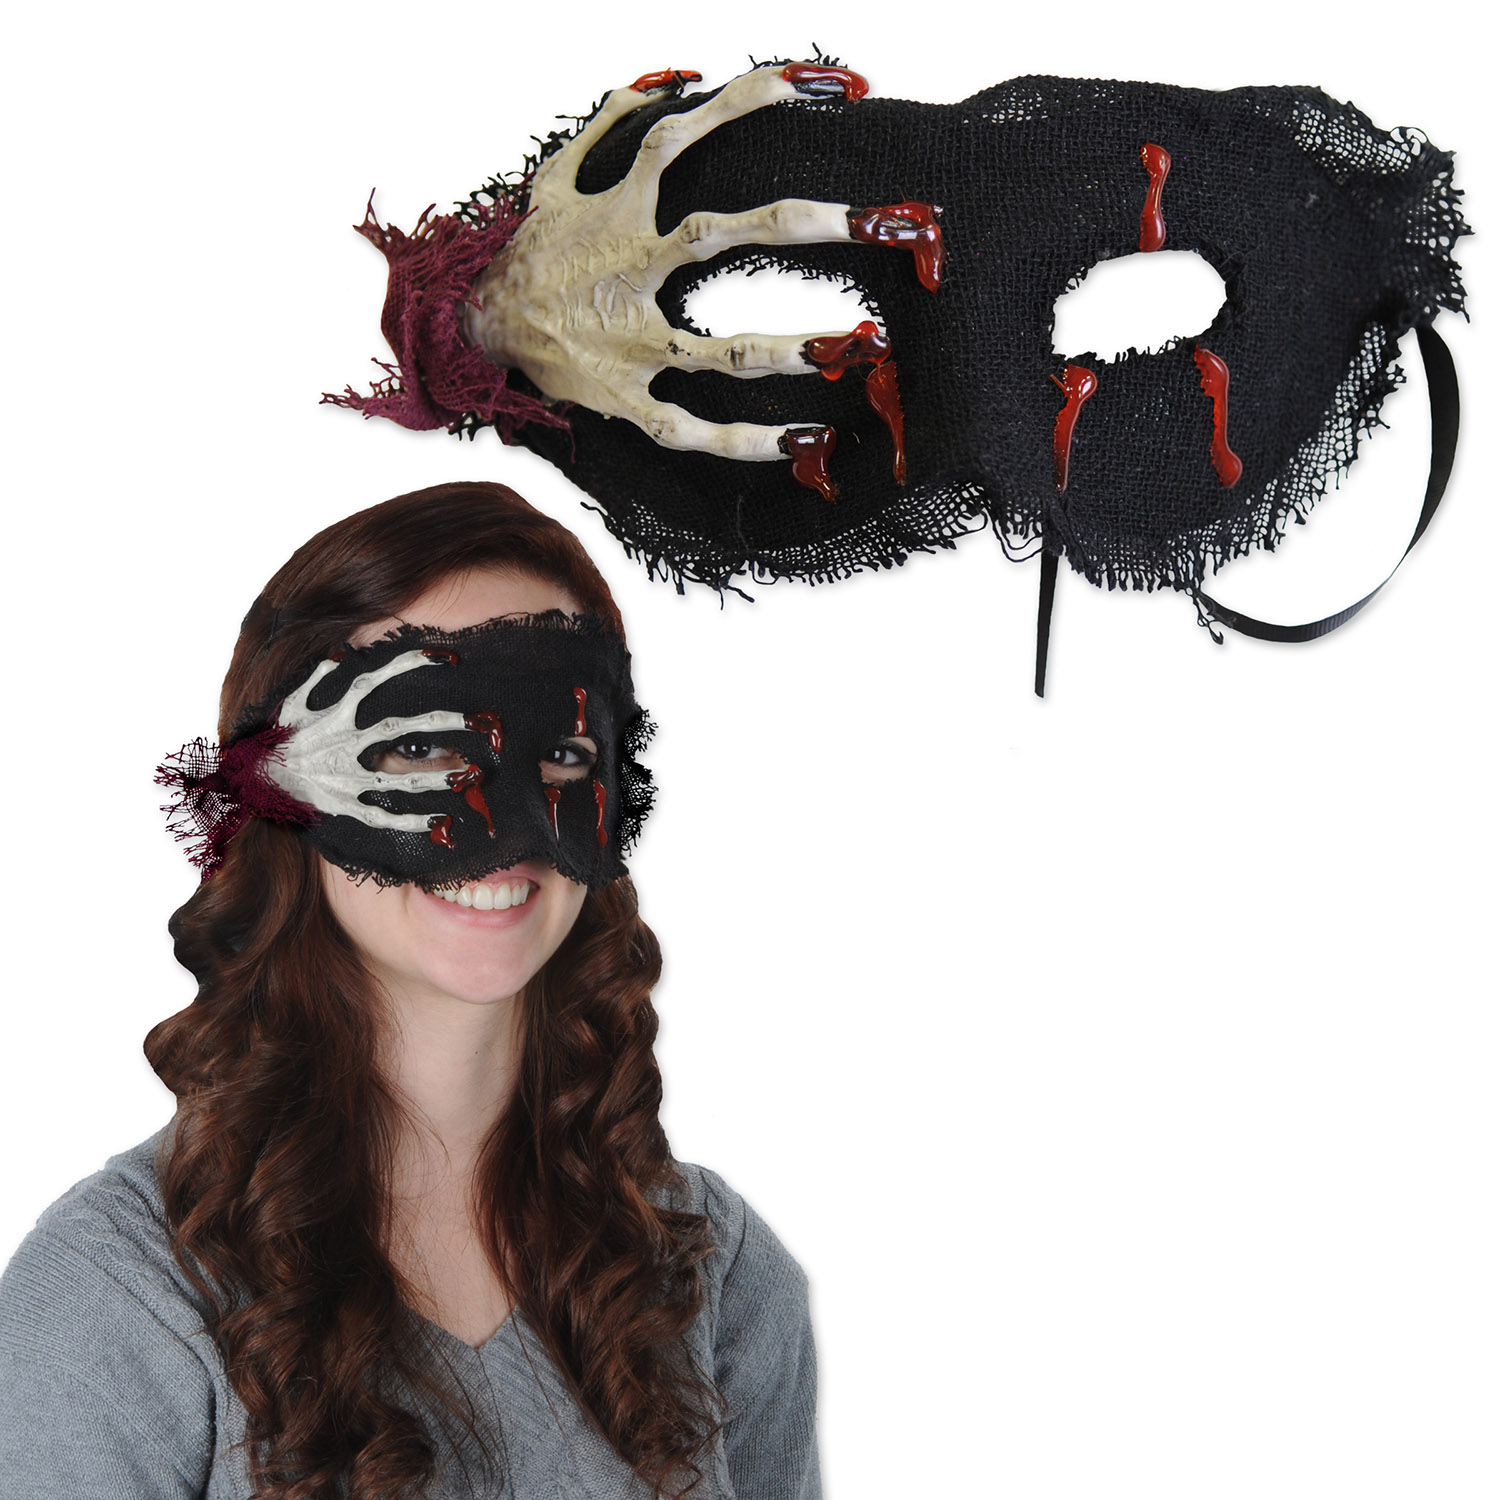 12 Pieces of Skeleton Hand Mask